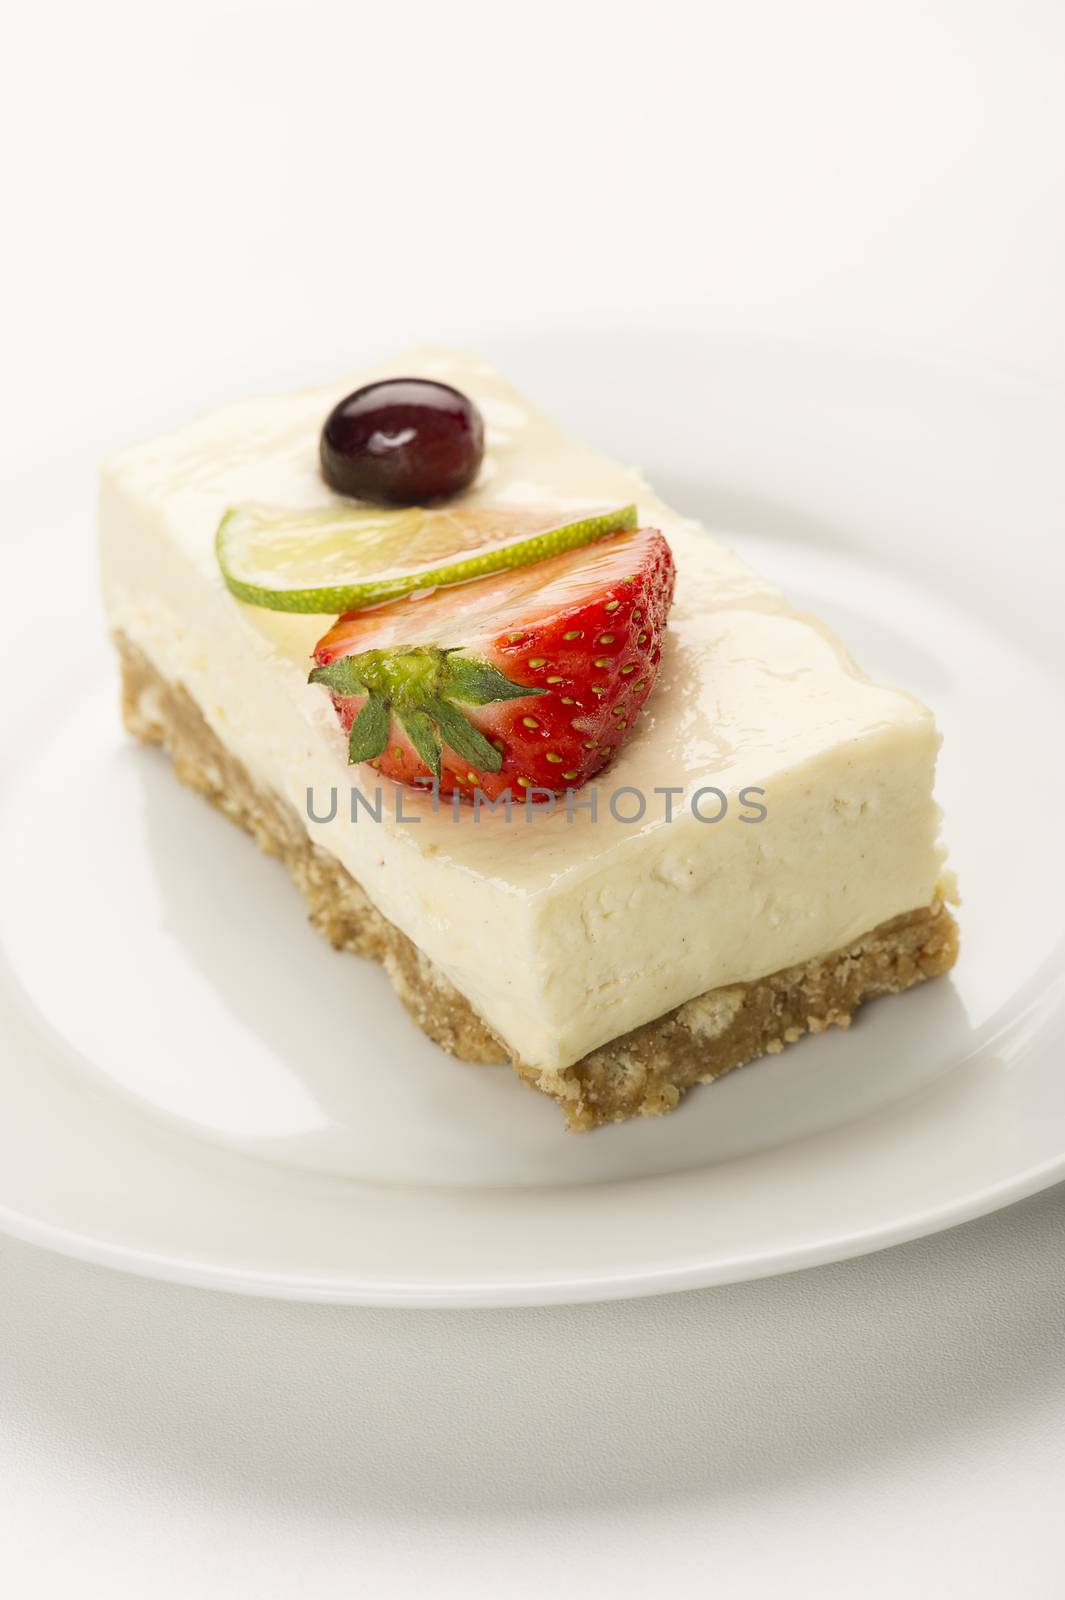 Portion of delicious creamy lemon or lime cheesecake on a pastry base topped with a slice if lime and strawberry , high angle close up view in vertical format with copyspace